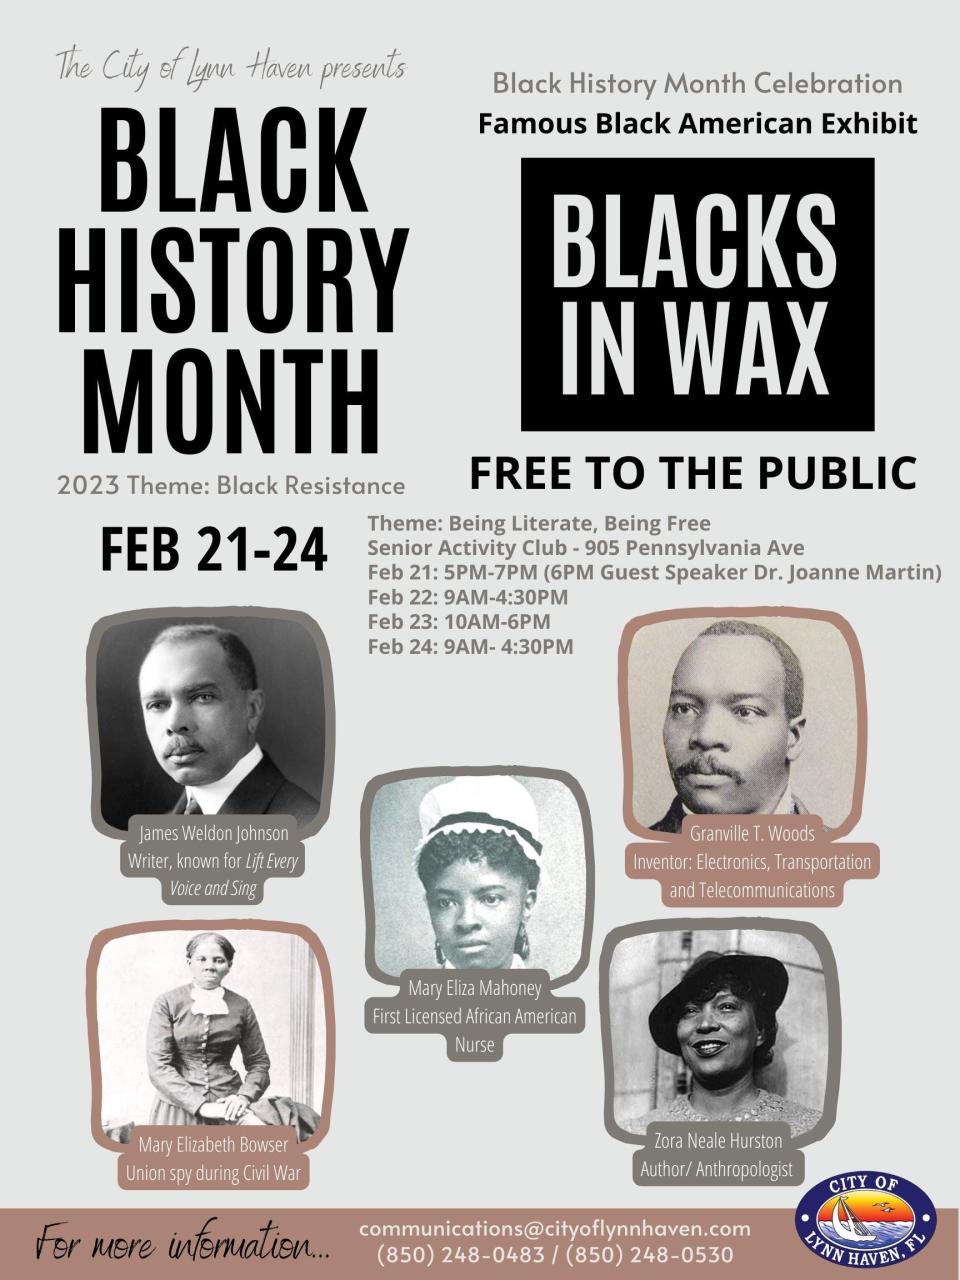 Blacks in Wax, a traveling exhibit, will display famous Black Americans in wax figures from Feb. 21-24 at the Senior Activity Club.